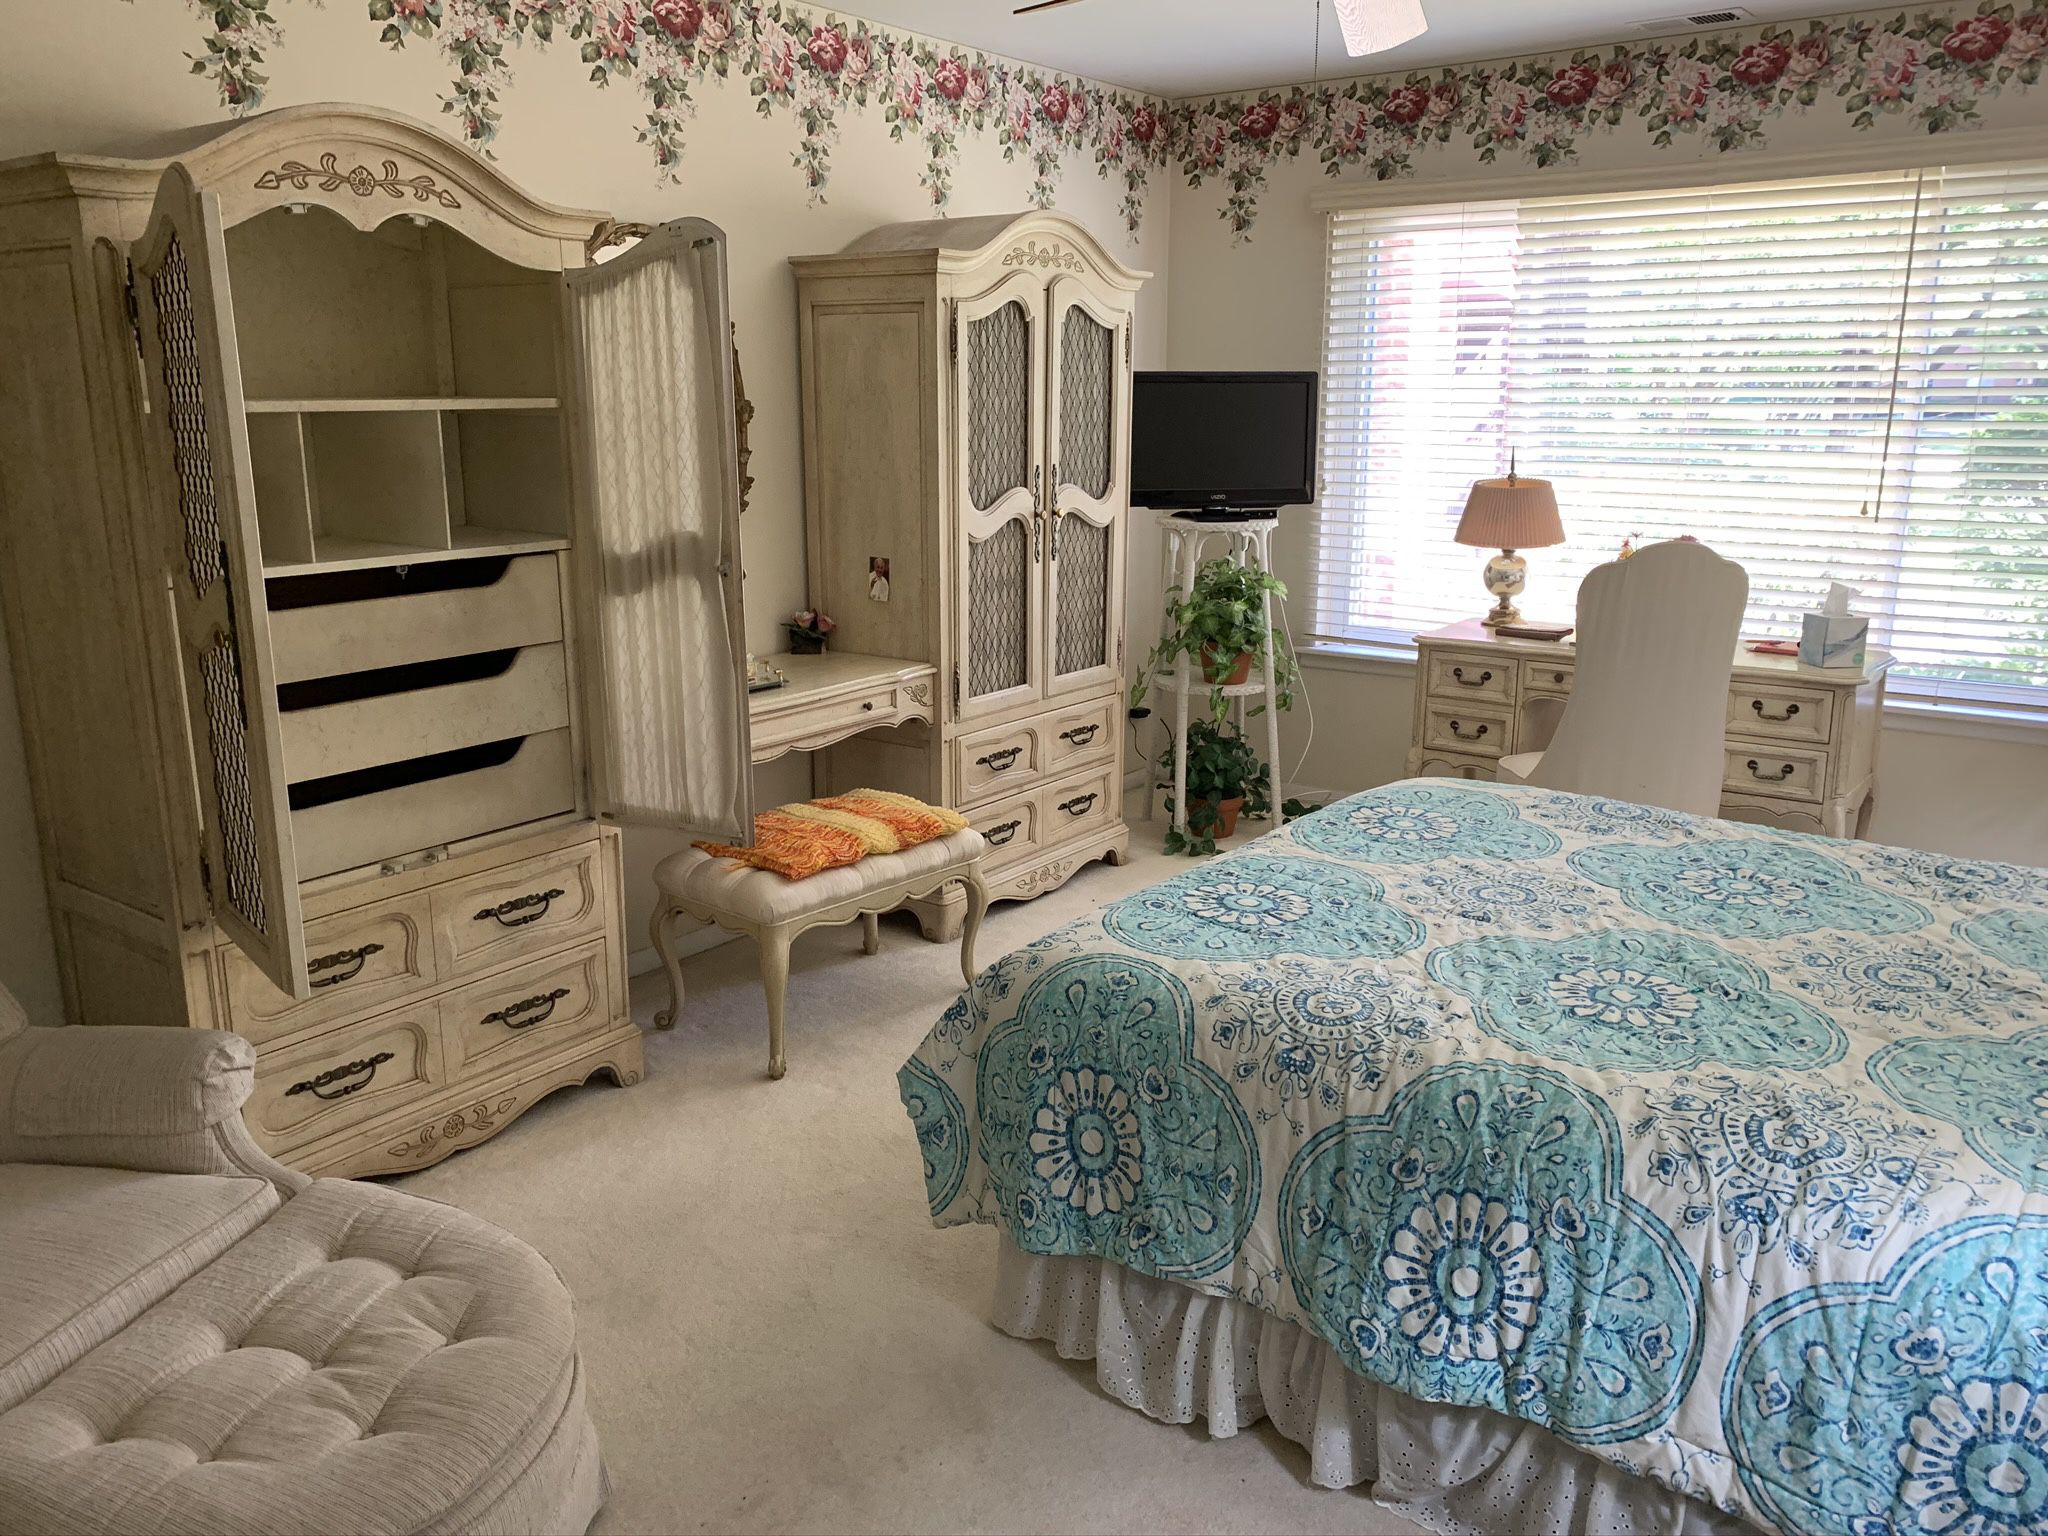 Top Quality Bedroom Suite By Hickory Furniture . Includes Two matching armoires connecting bridge. Also Two matching night stands, A Matching Desk 